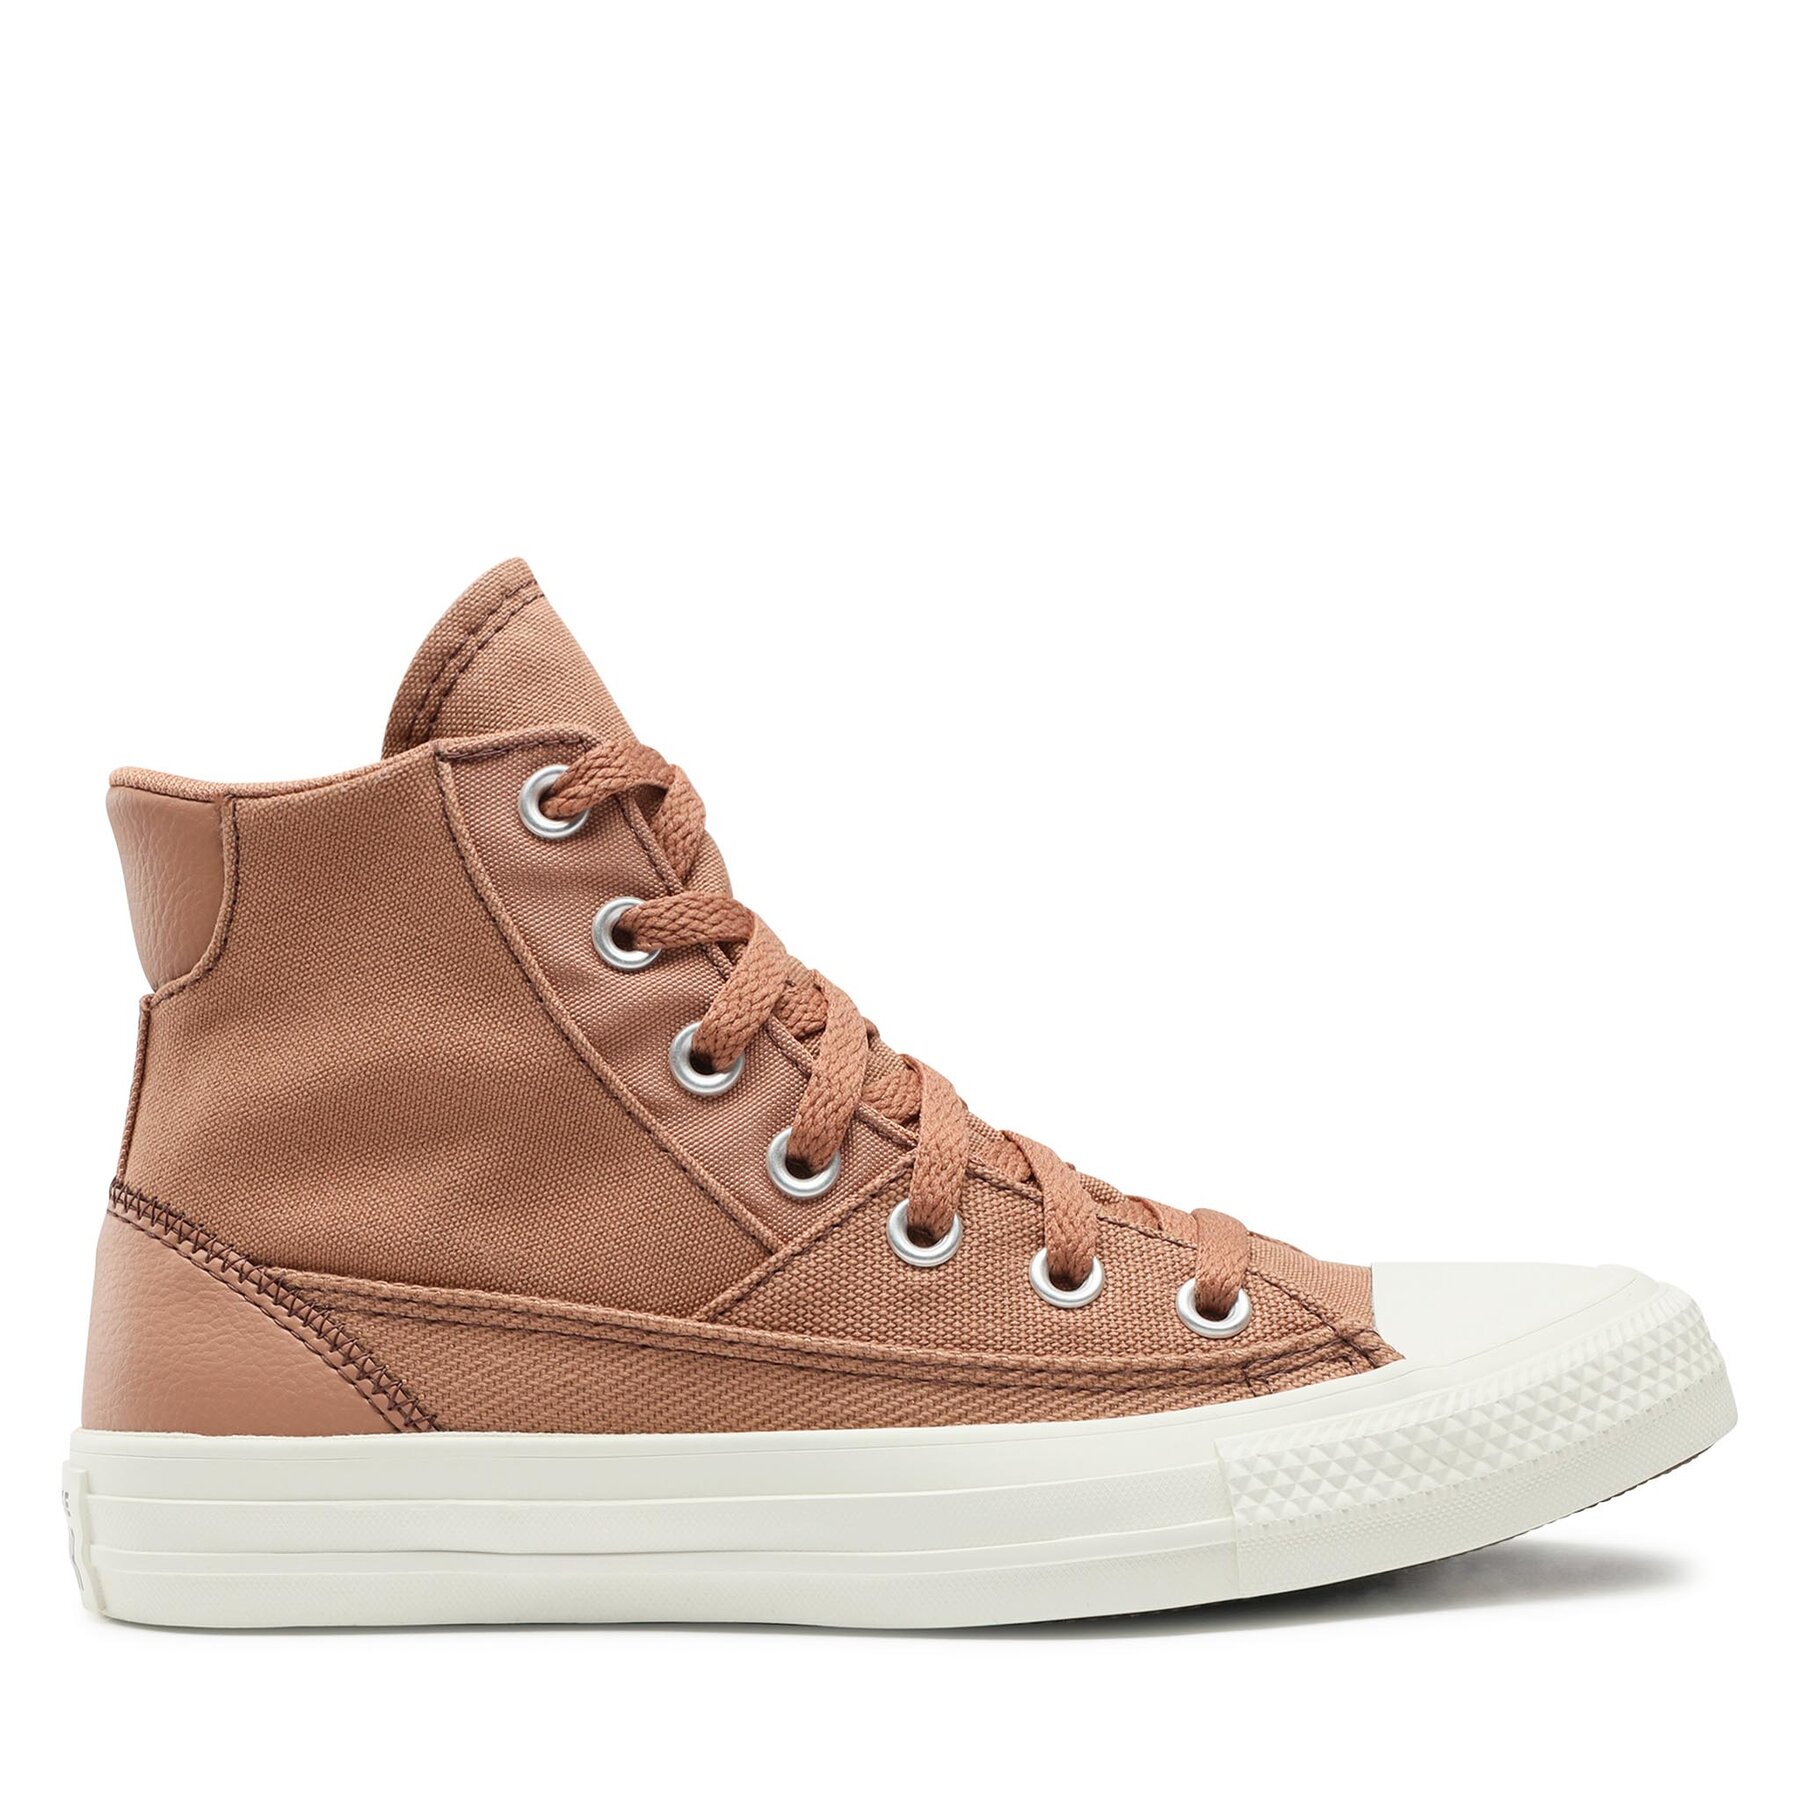 Sneakers aus Stoff Converse Chuck Taylor All Star Patchwork A04676C Taupe/Red von Converse